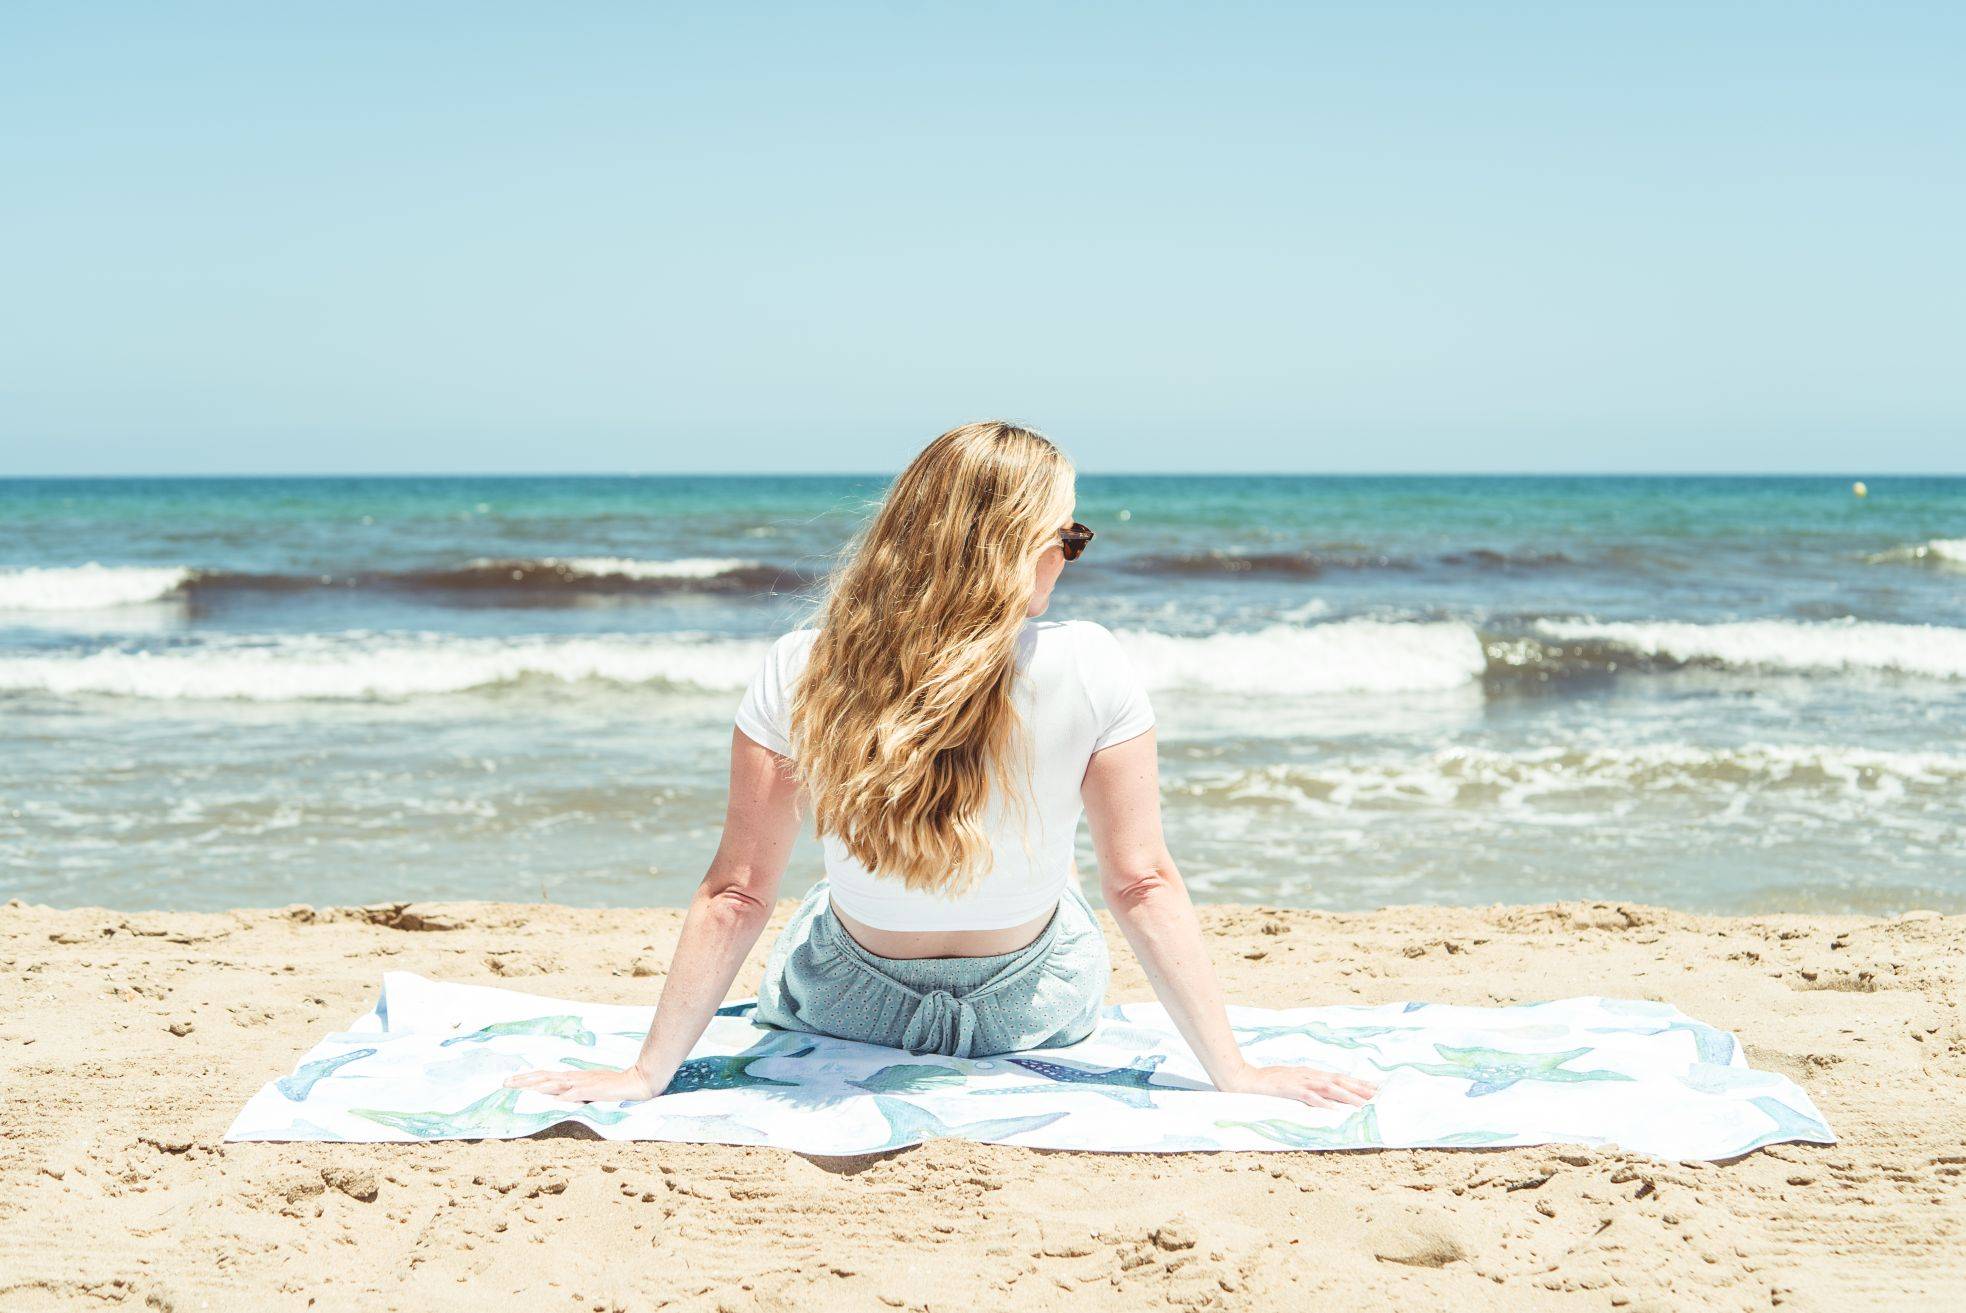 Image of women with wavy hair on beach